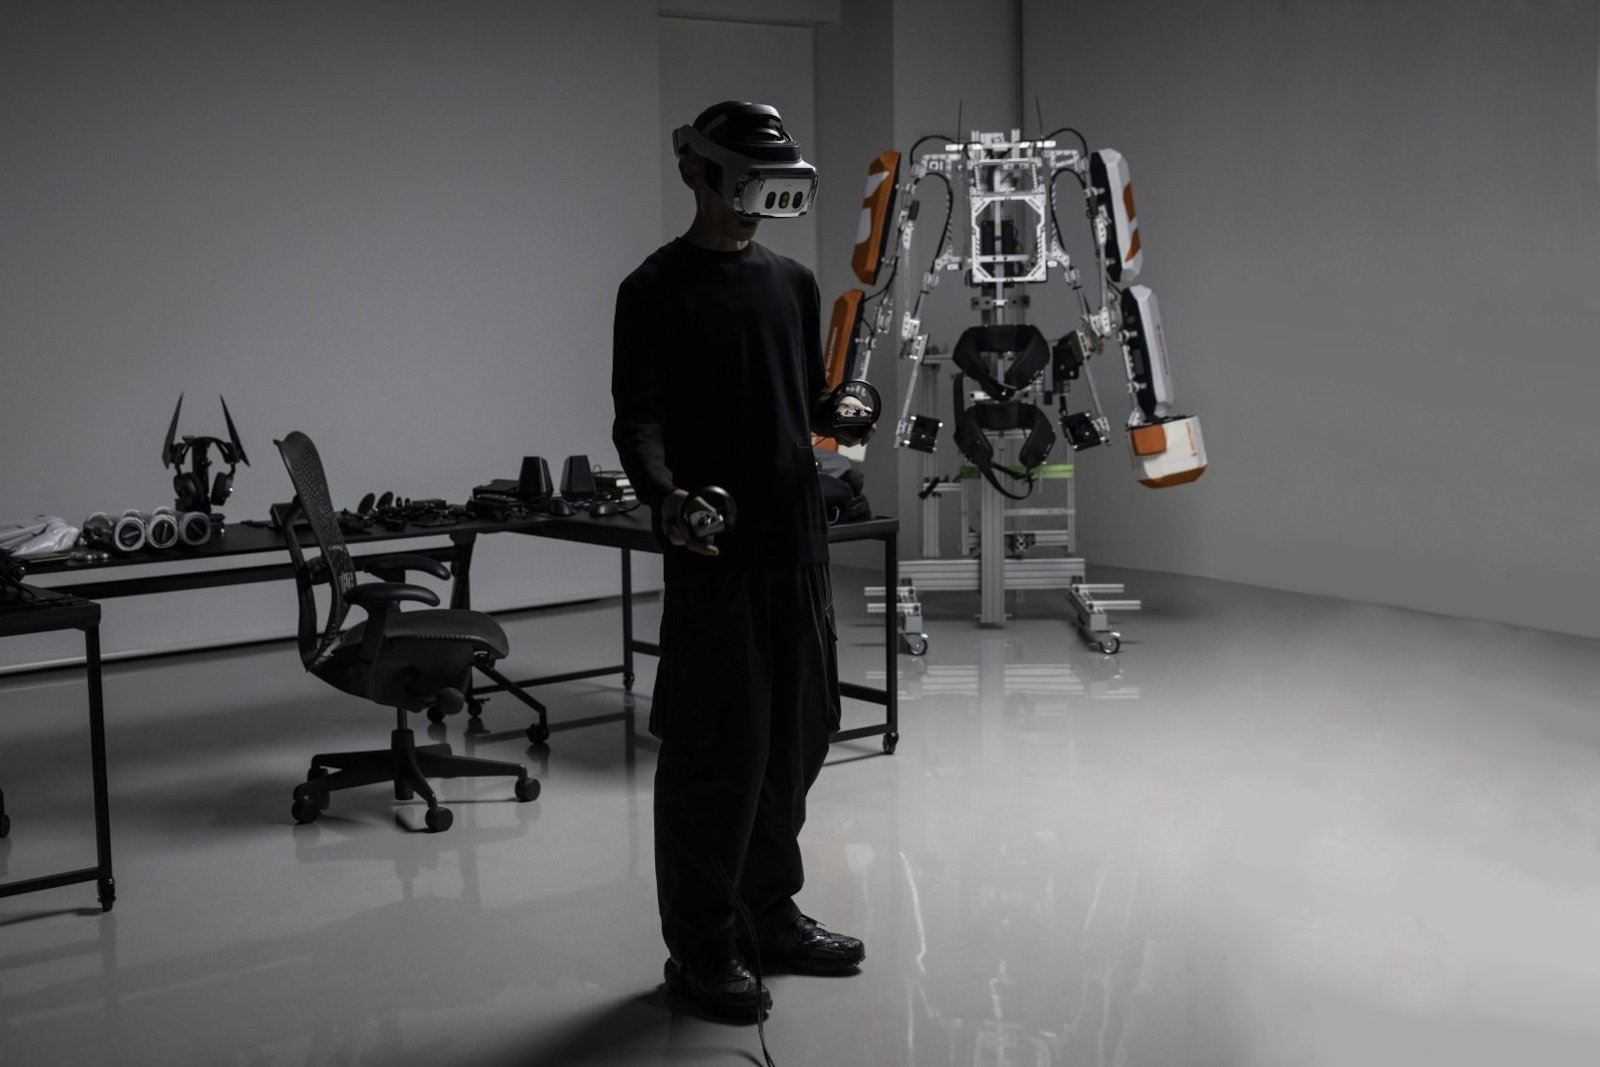 A Varjo X-4 VR headset is worn by a person standing in front of robotic exoskeleton.